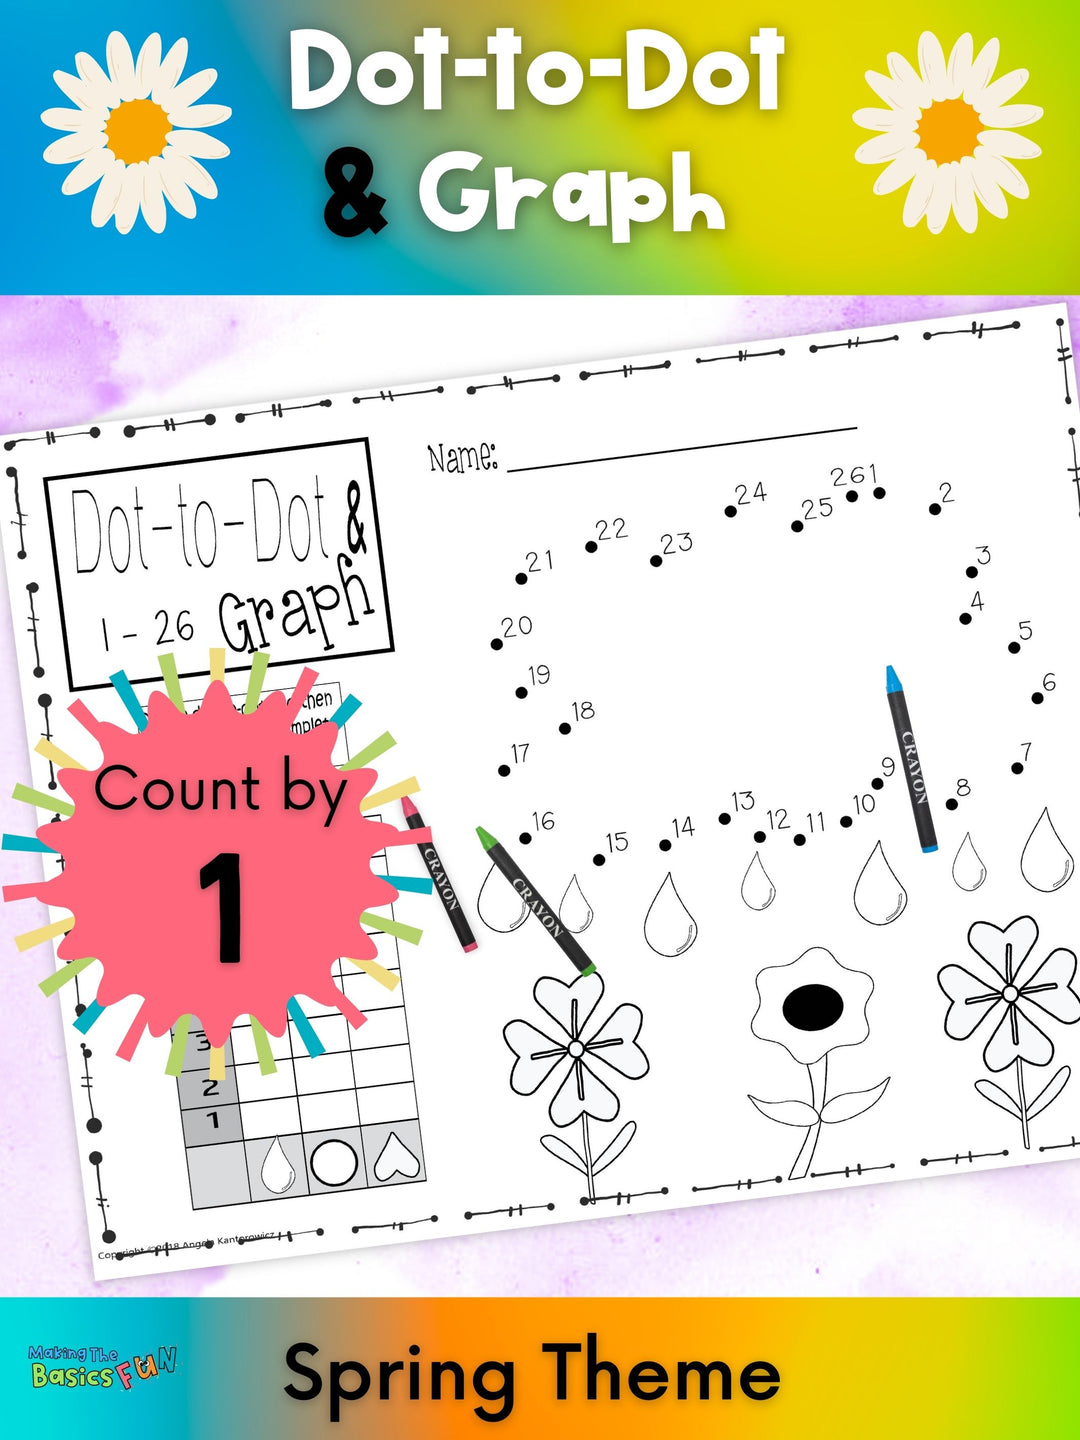 Simple math printable of a Dot-to-Dot & Graph Count by 1 Puzzle. Clouds, raindrops and flowers.